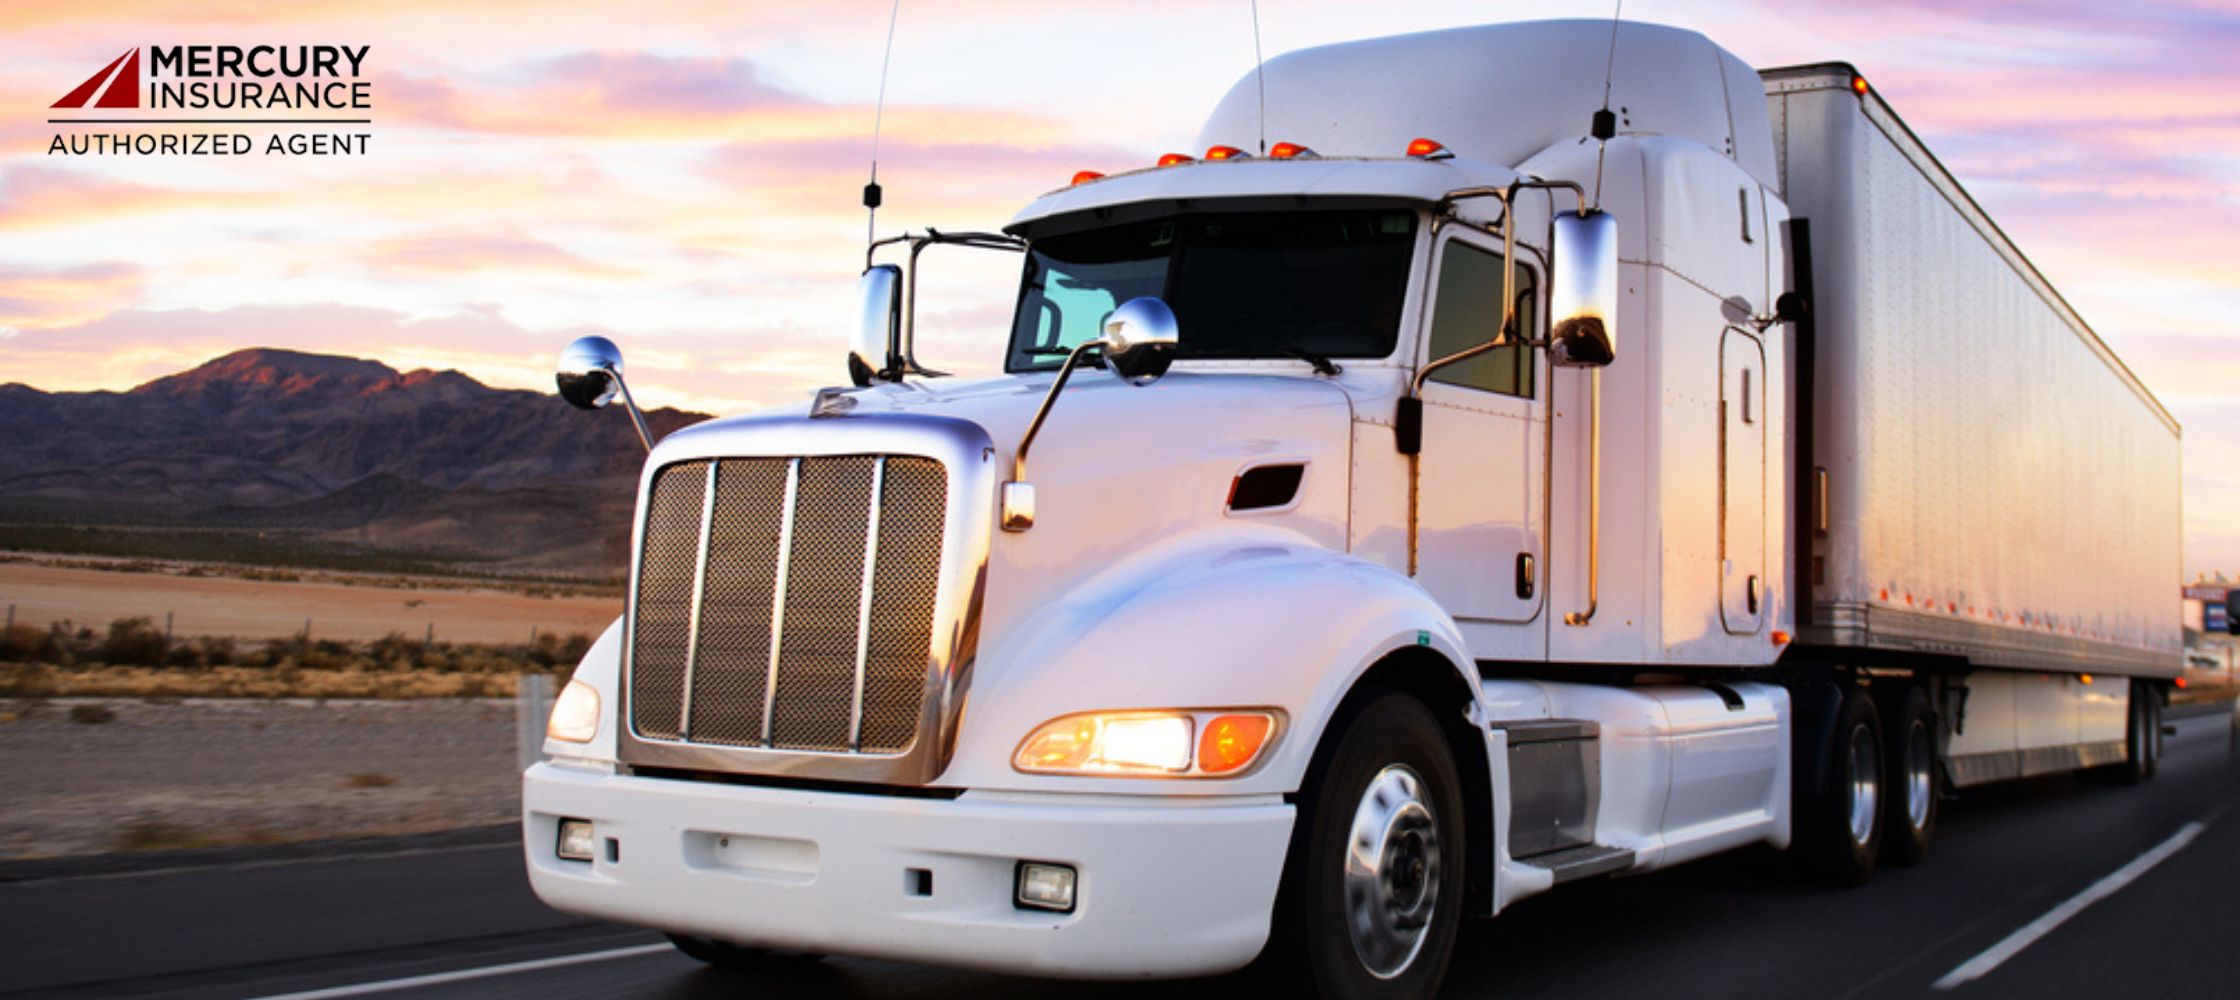 How Can You Insure Your Commercial Vehicle Contents Against Theft?